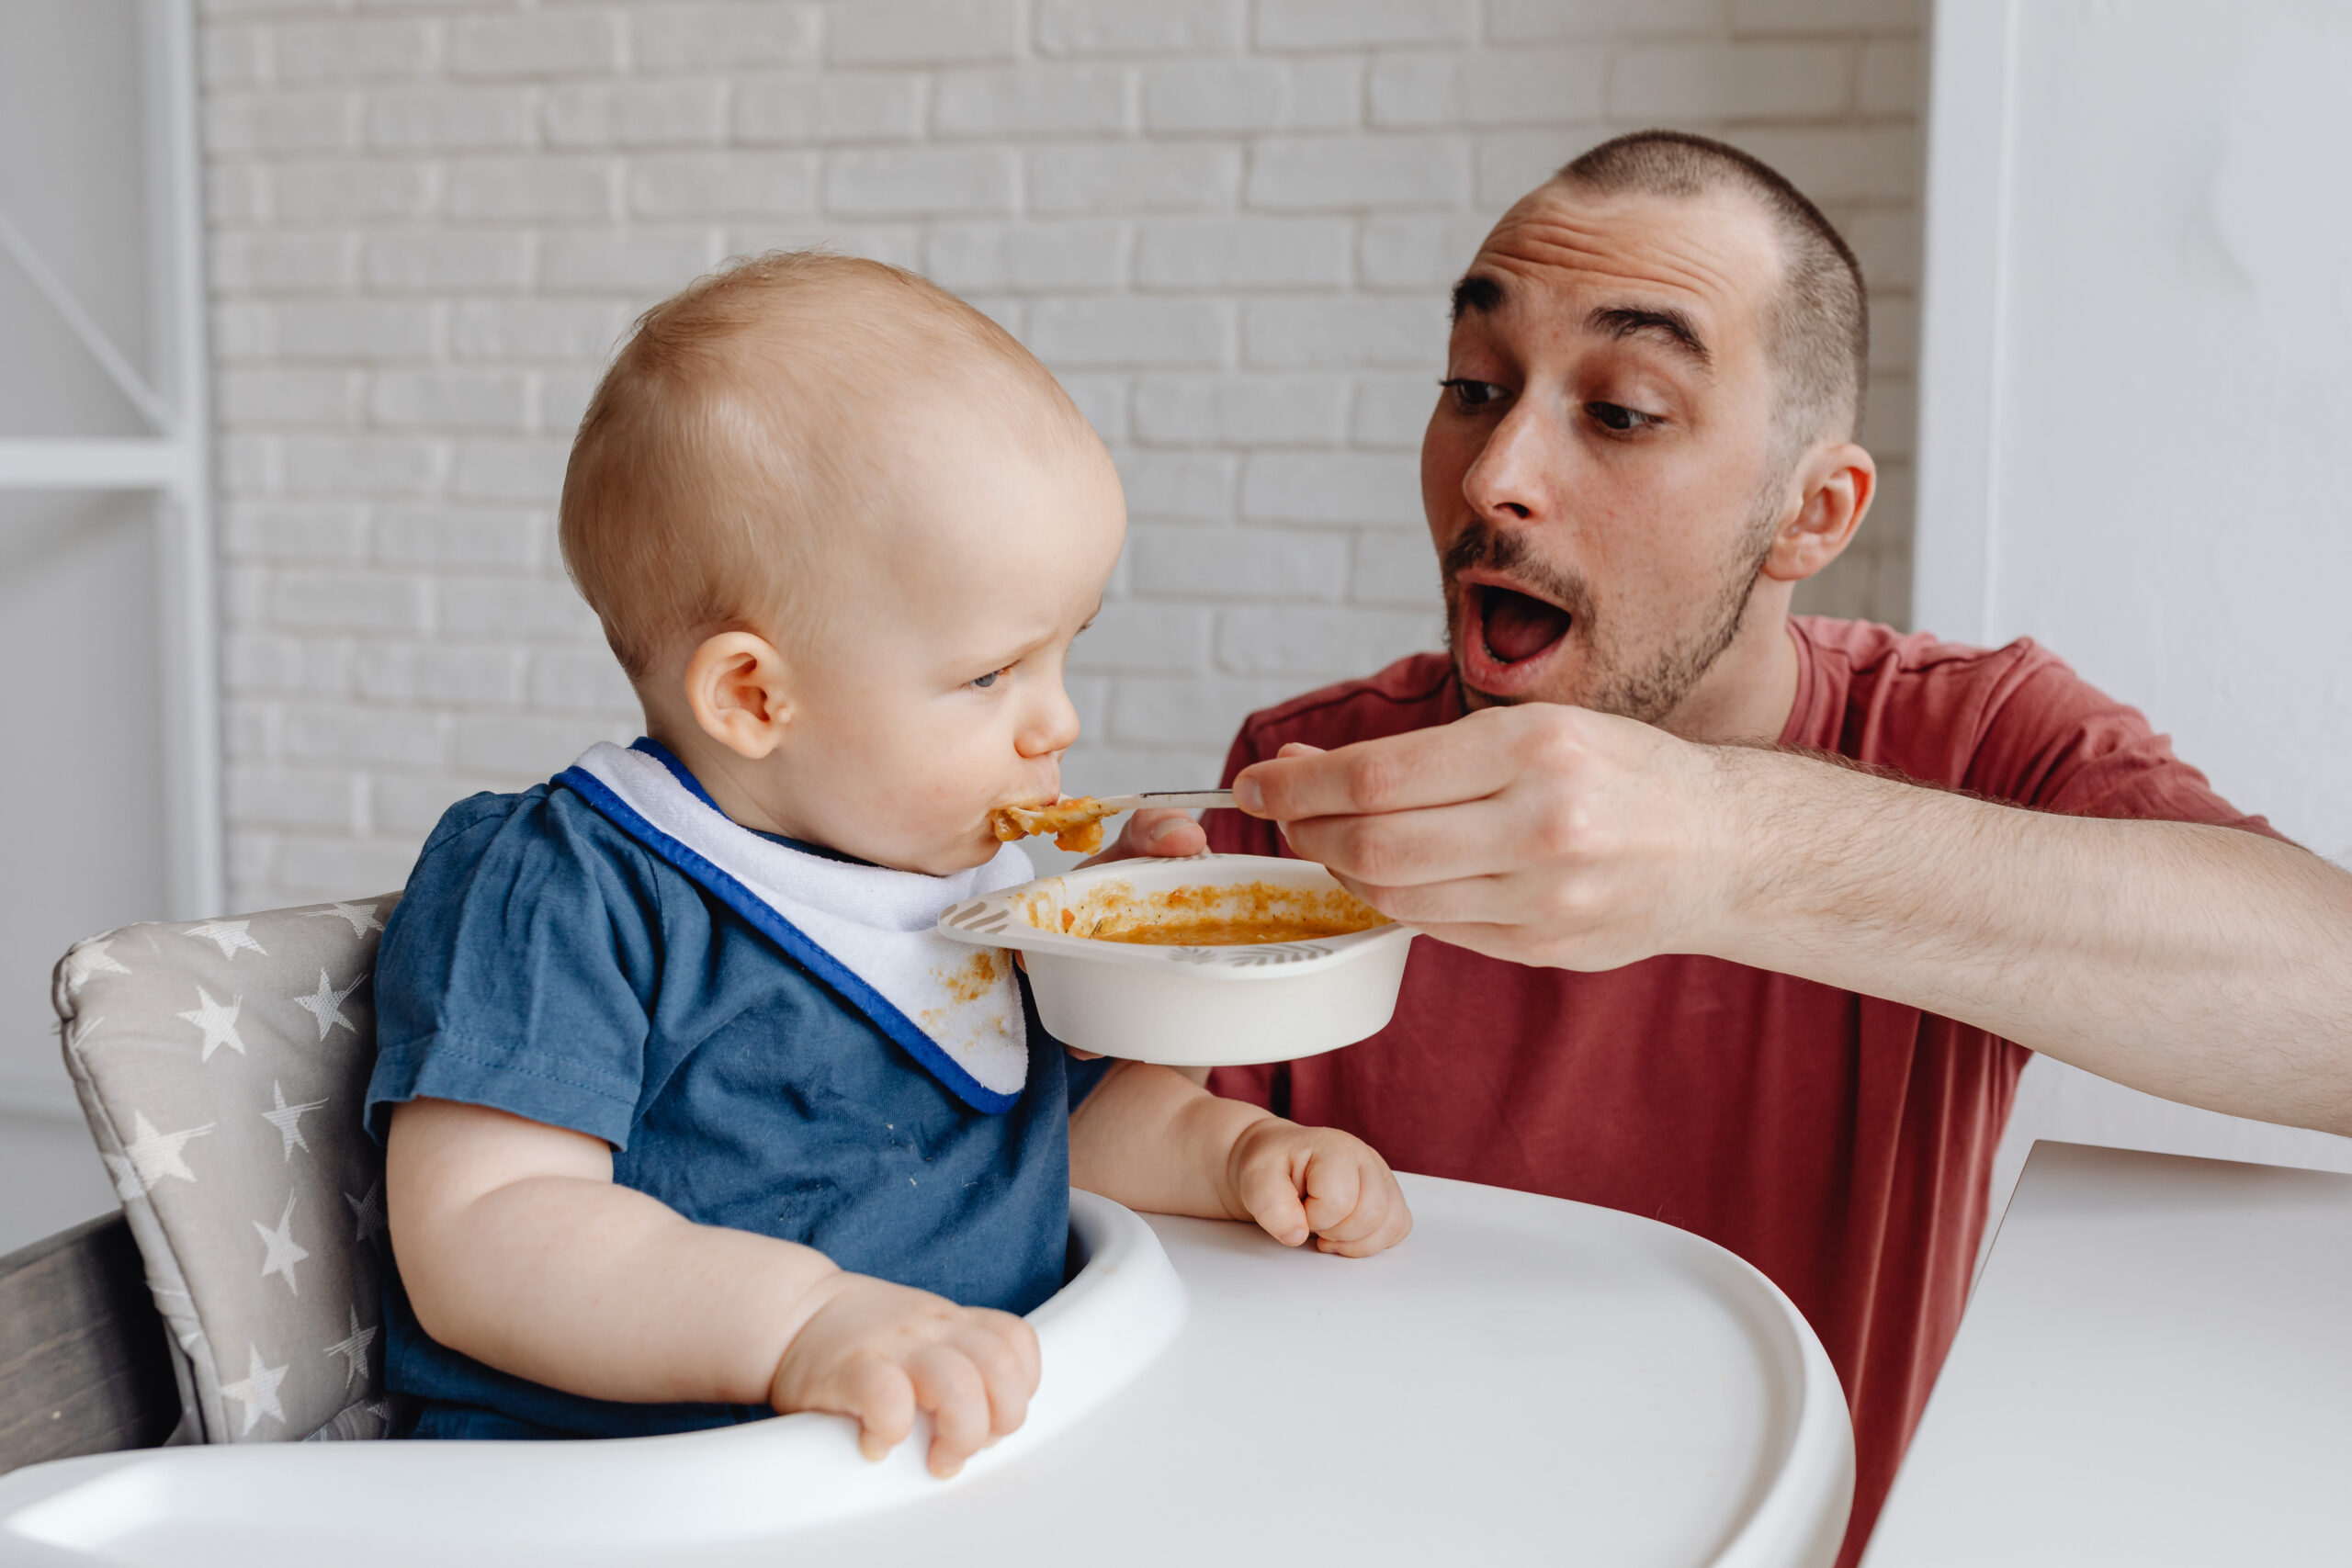 Photo of a man in a red shirt feeding a baby